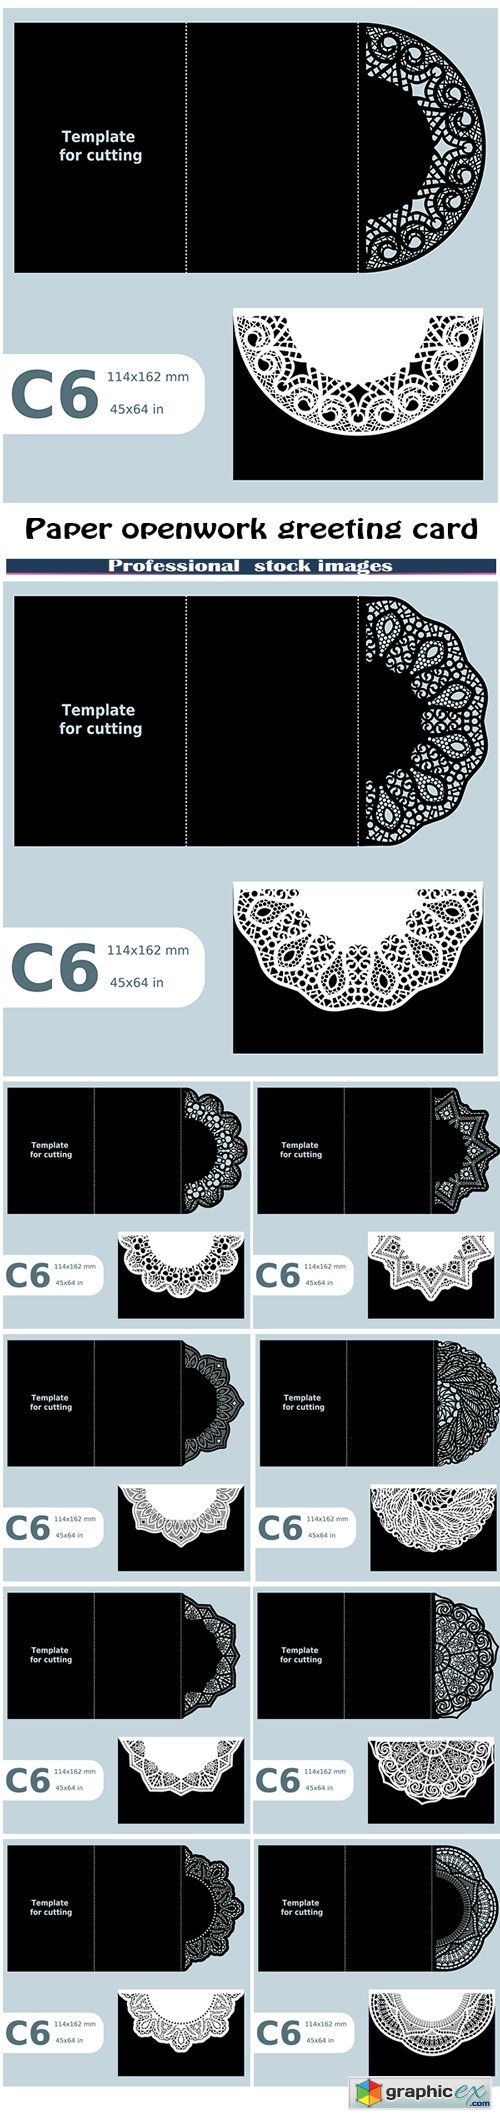 Paper openwork greeting card template for cutting #2